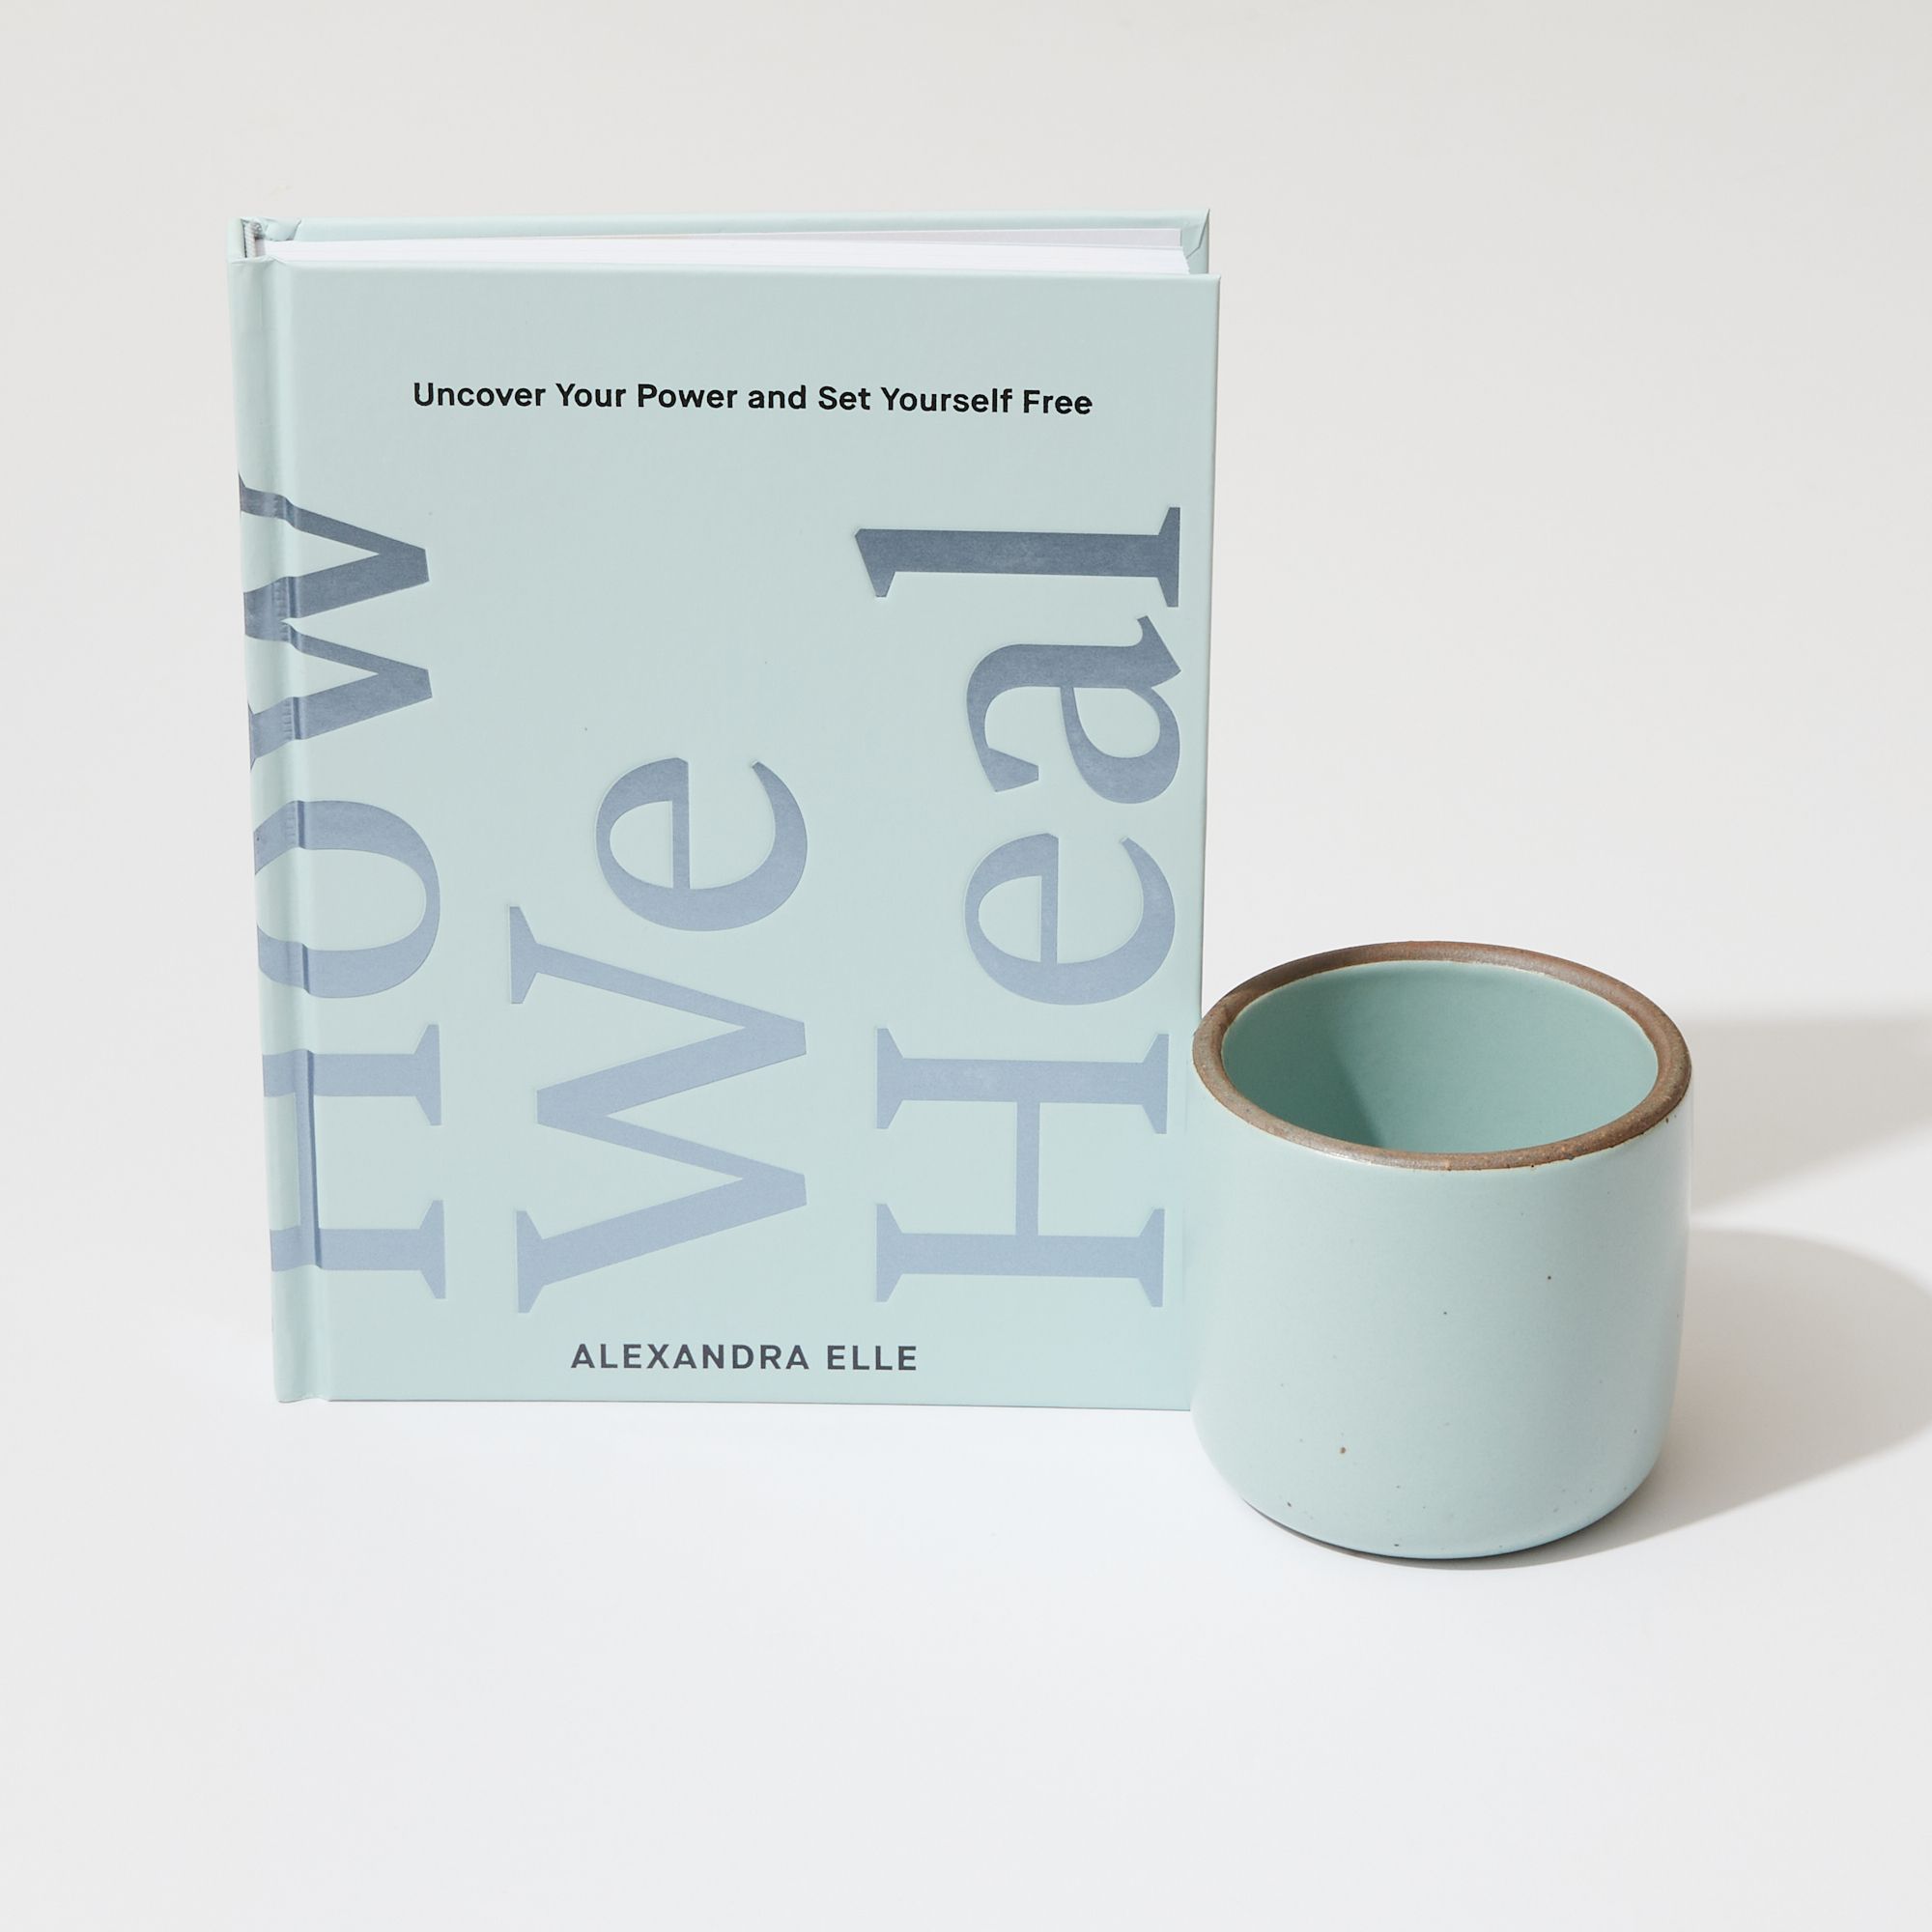 A pale turquoise book standing up that reads "How We Heal", with a ceramic cup in a pale turquoise color next to it. 